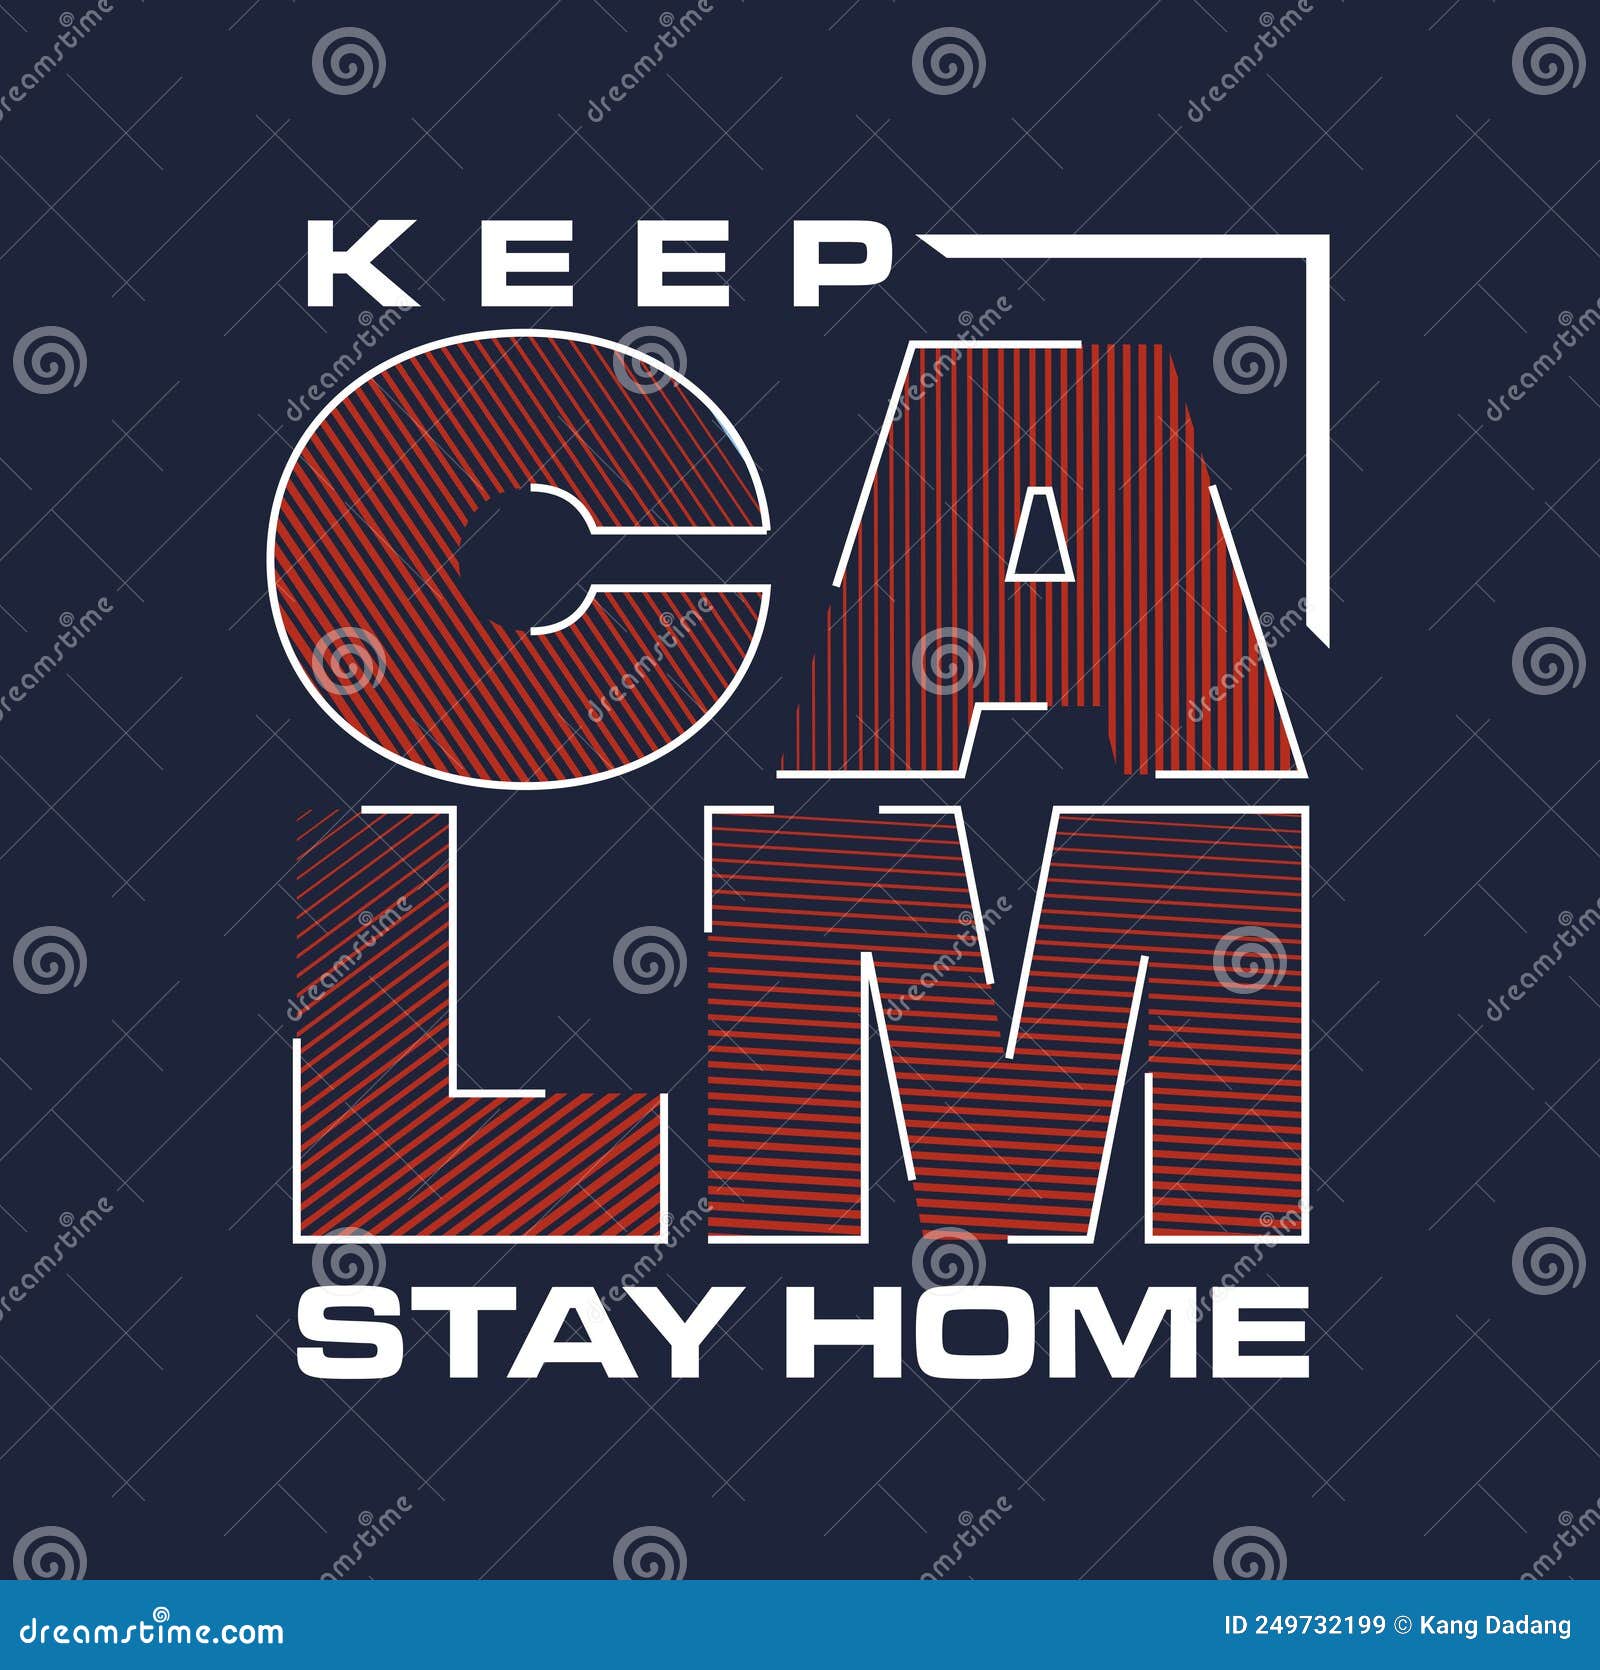 Keep Calm Design Typography, Vector Design Text Illustration, Sign, T Shirt Graphics, Print Stock Vector - Illustration of jersey, 249732199